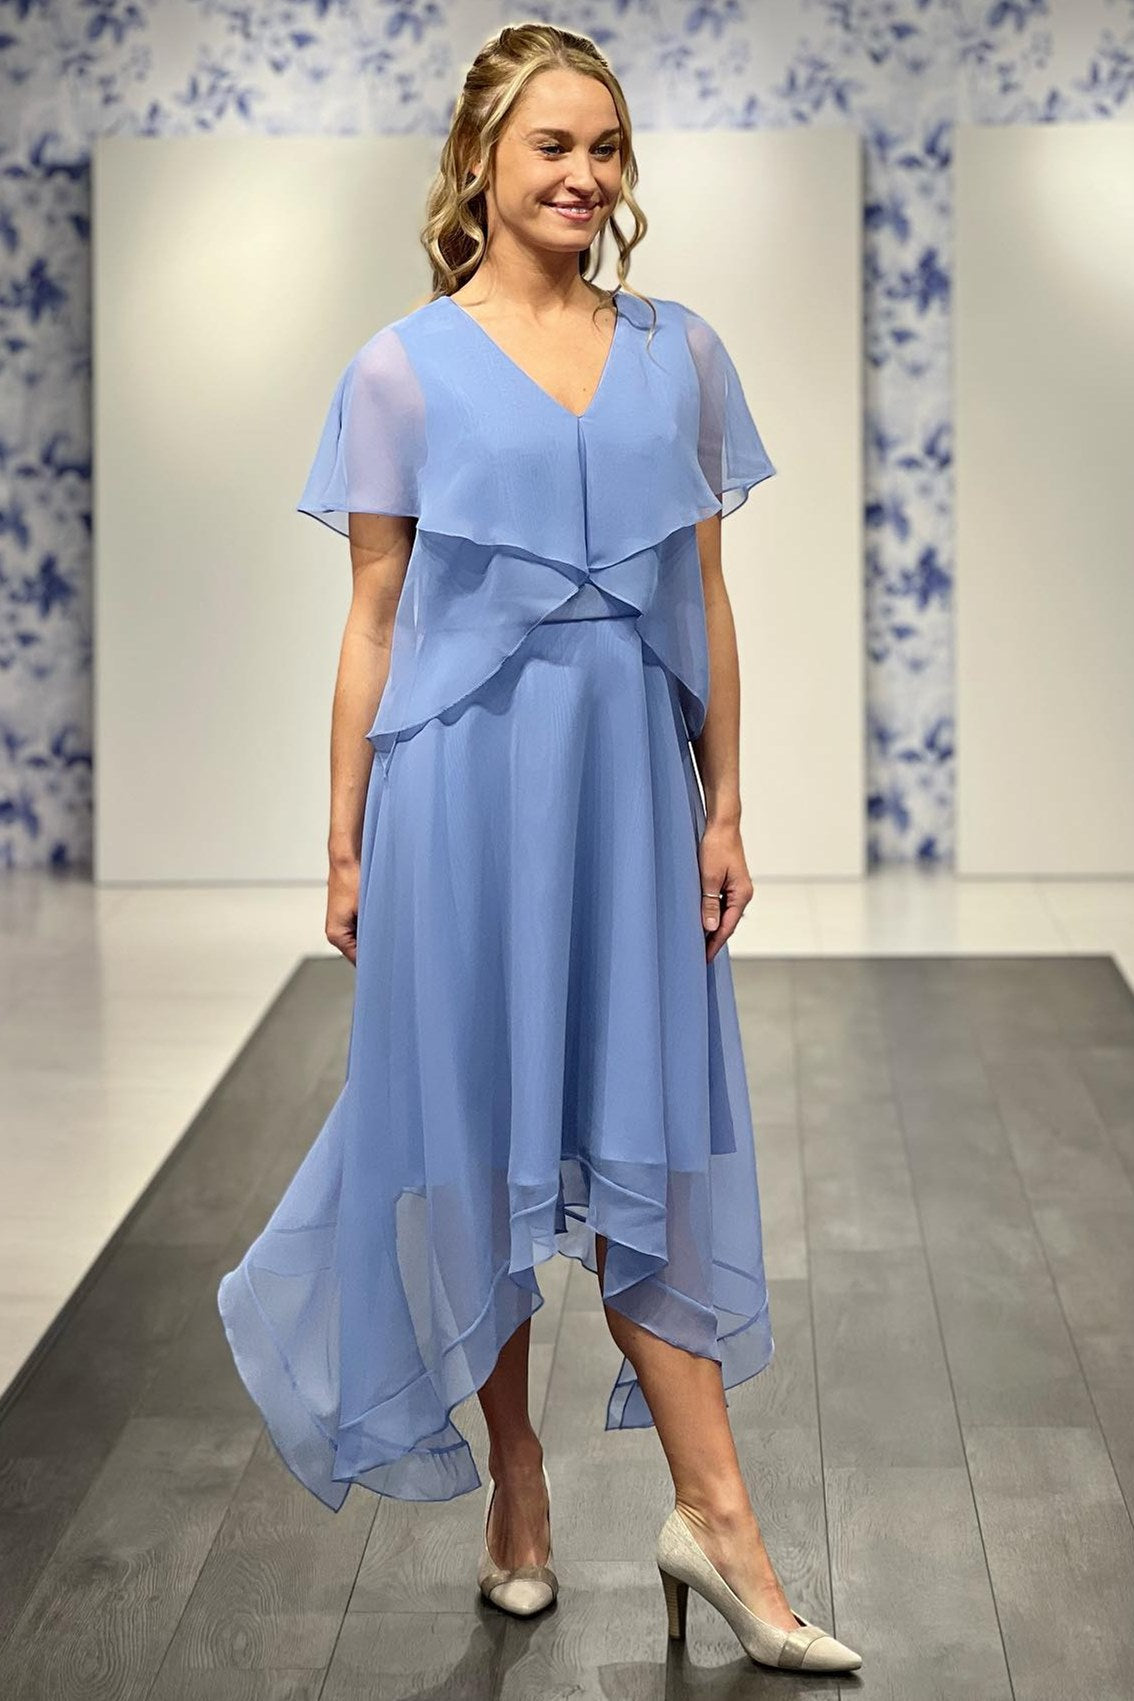 Periwinkle Chiffon V-Neck Ruffles A-Line Mother of the Bride Dress